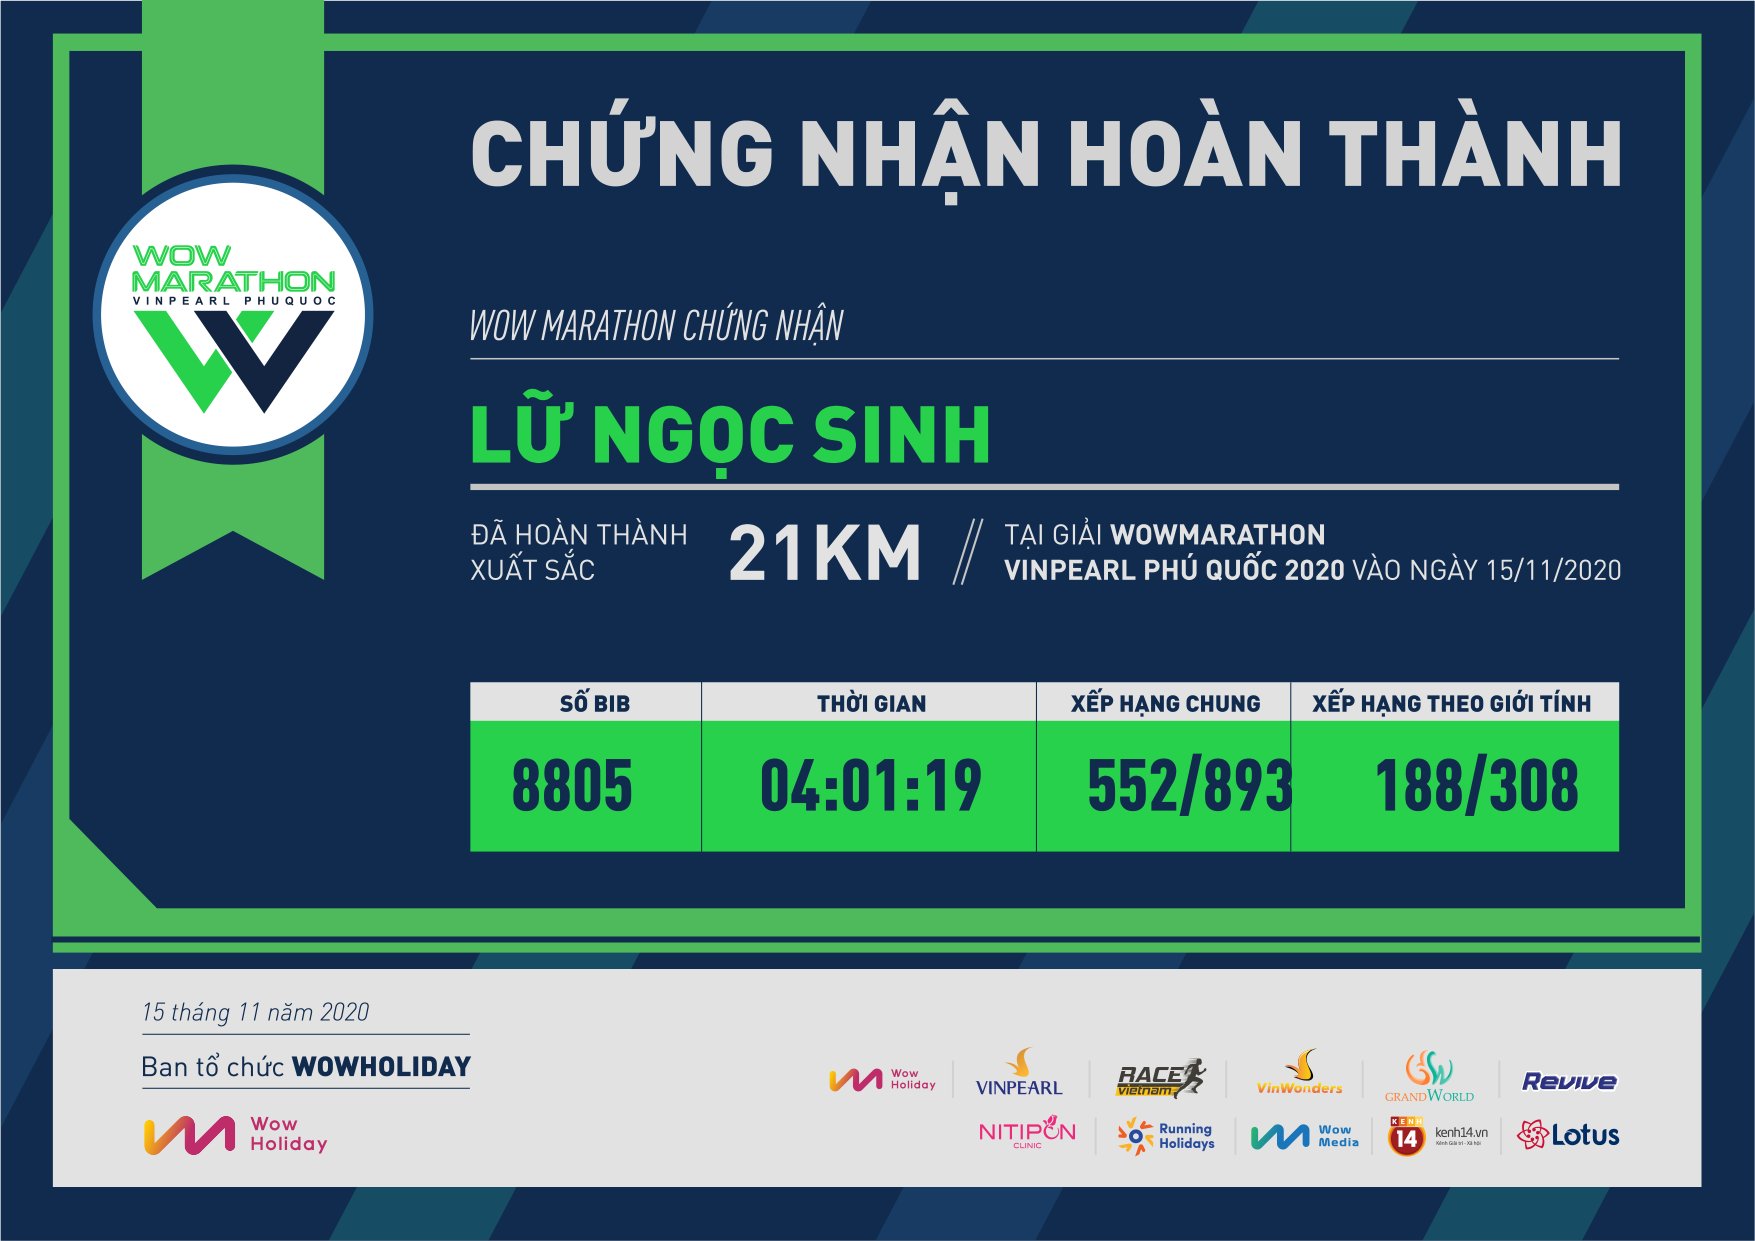 8805 - LỮ NGỌC SINH